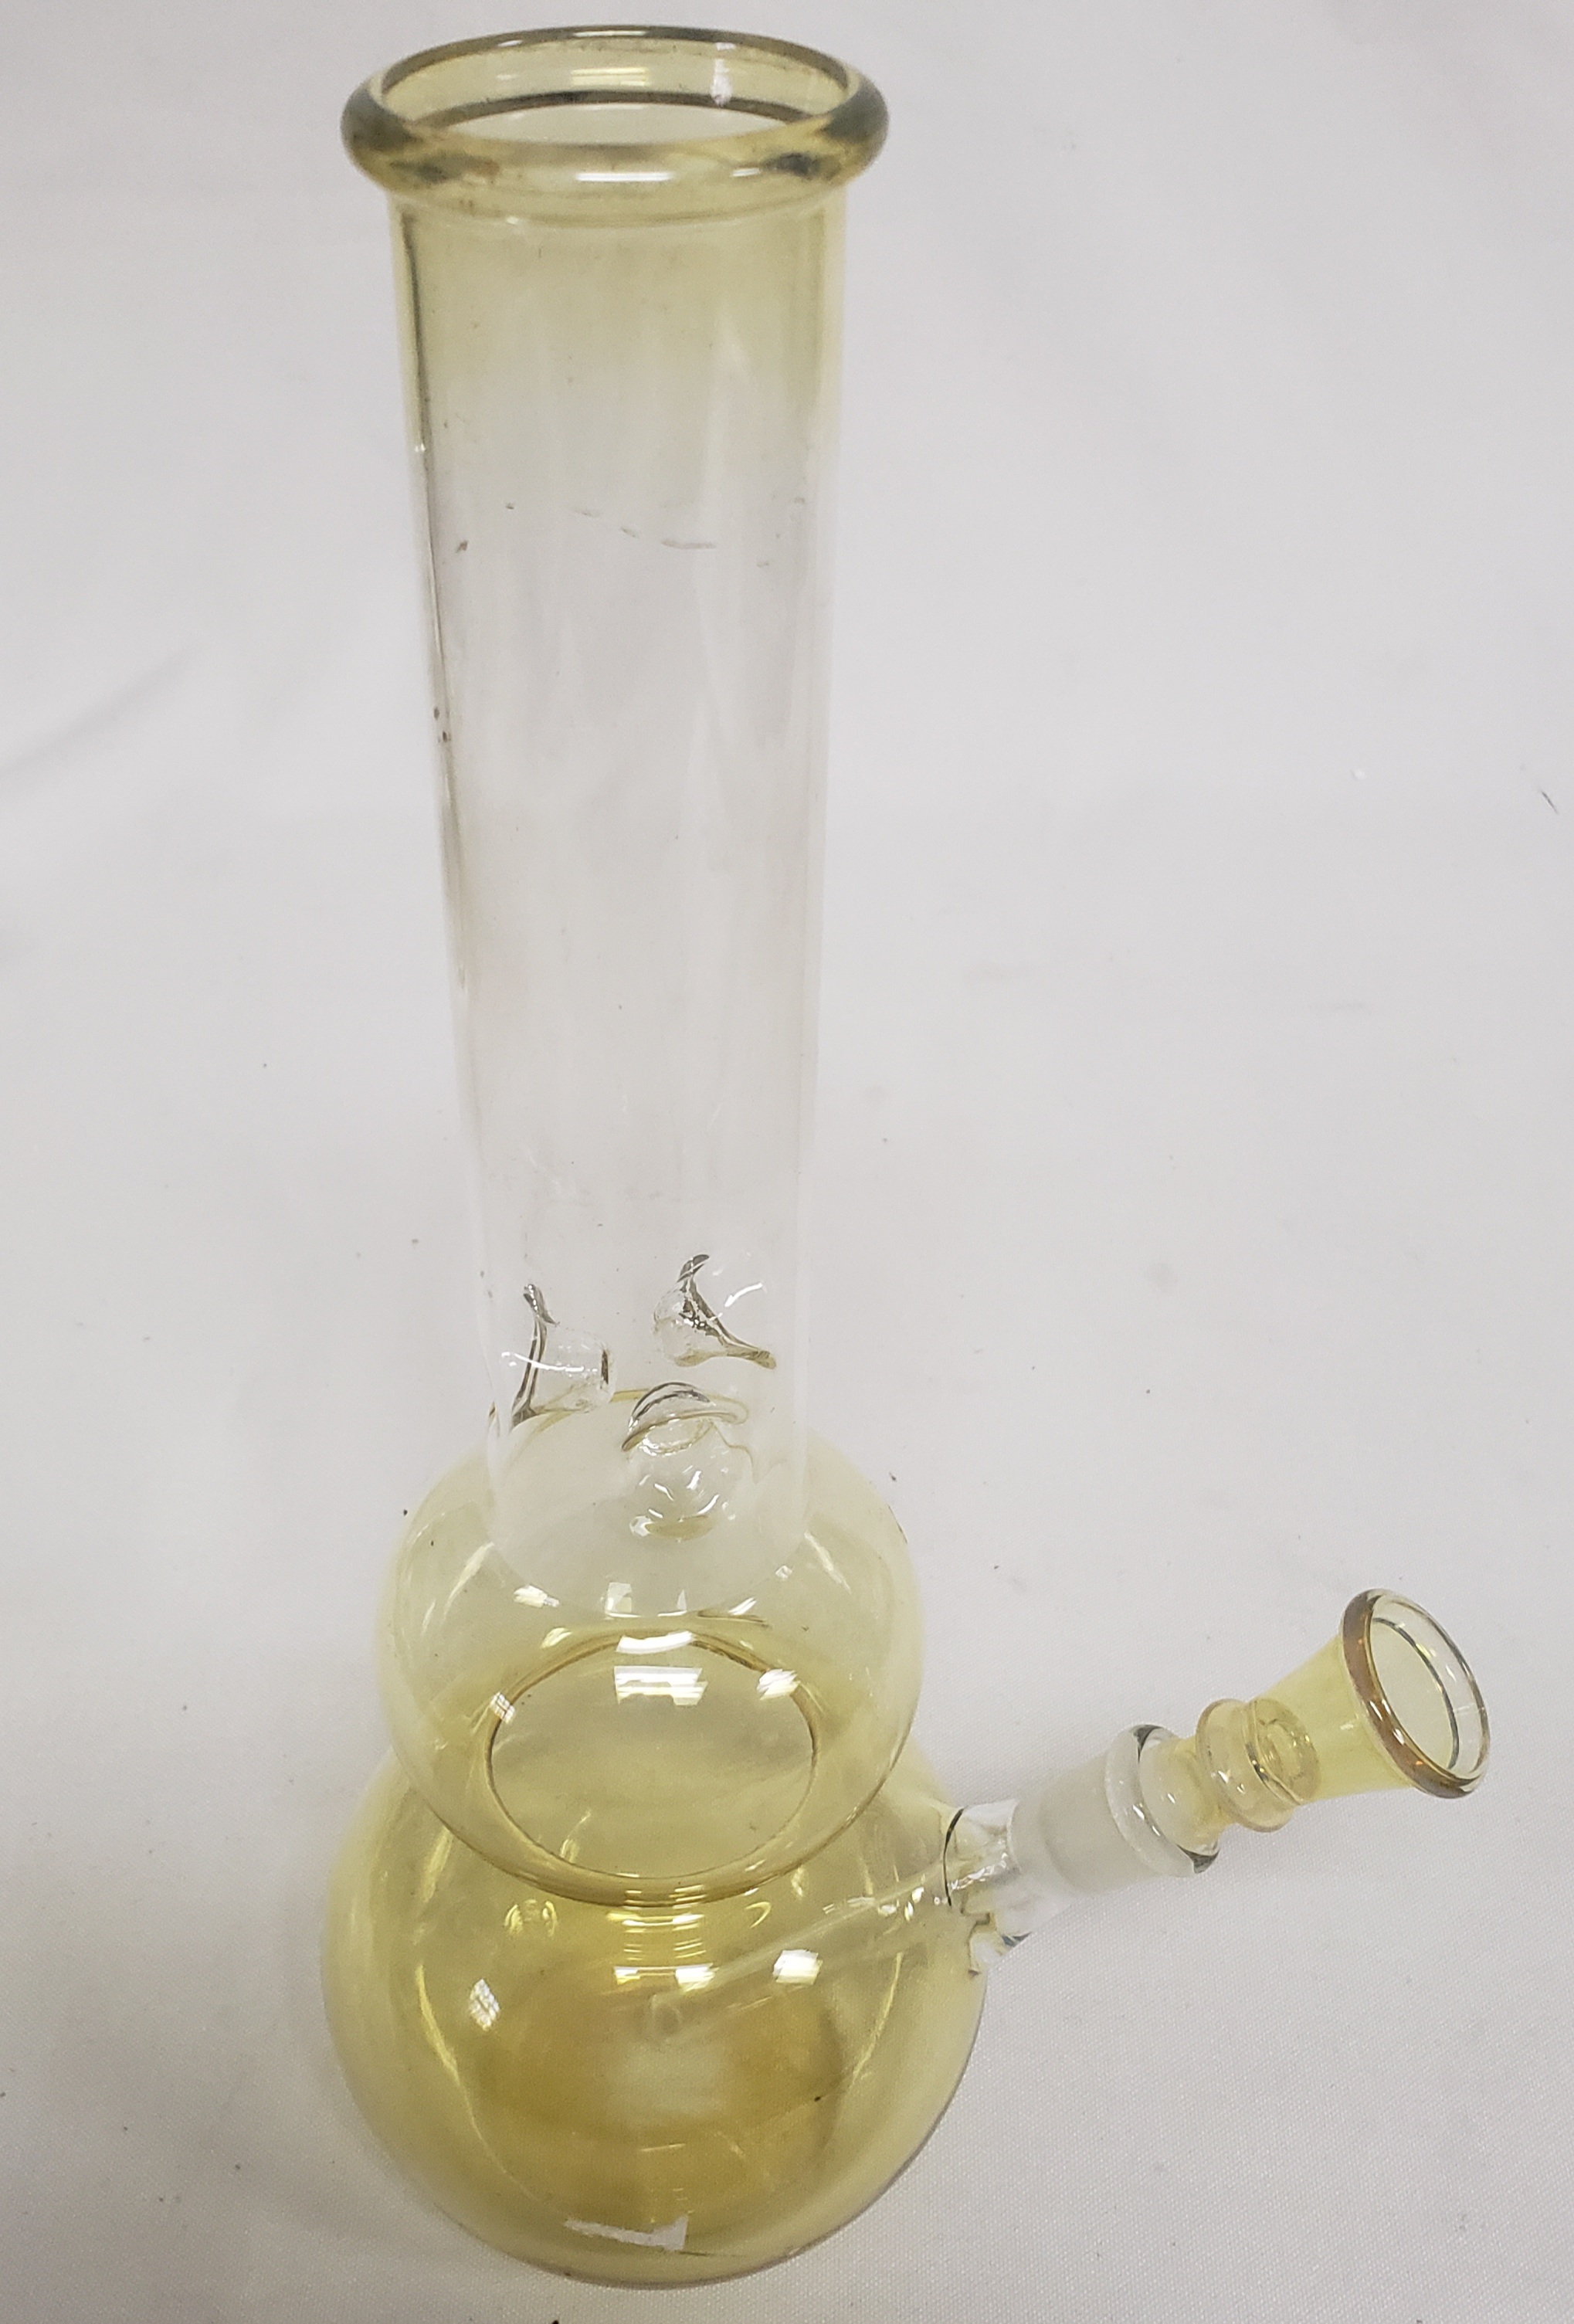 12\" Light Yellow WP with Ice Catcher Buy 1 Get 1 FREE #CL10